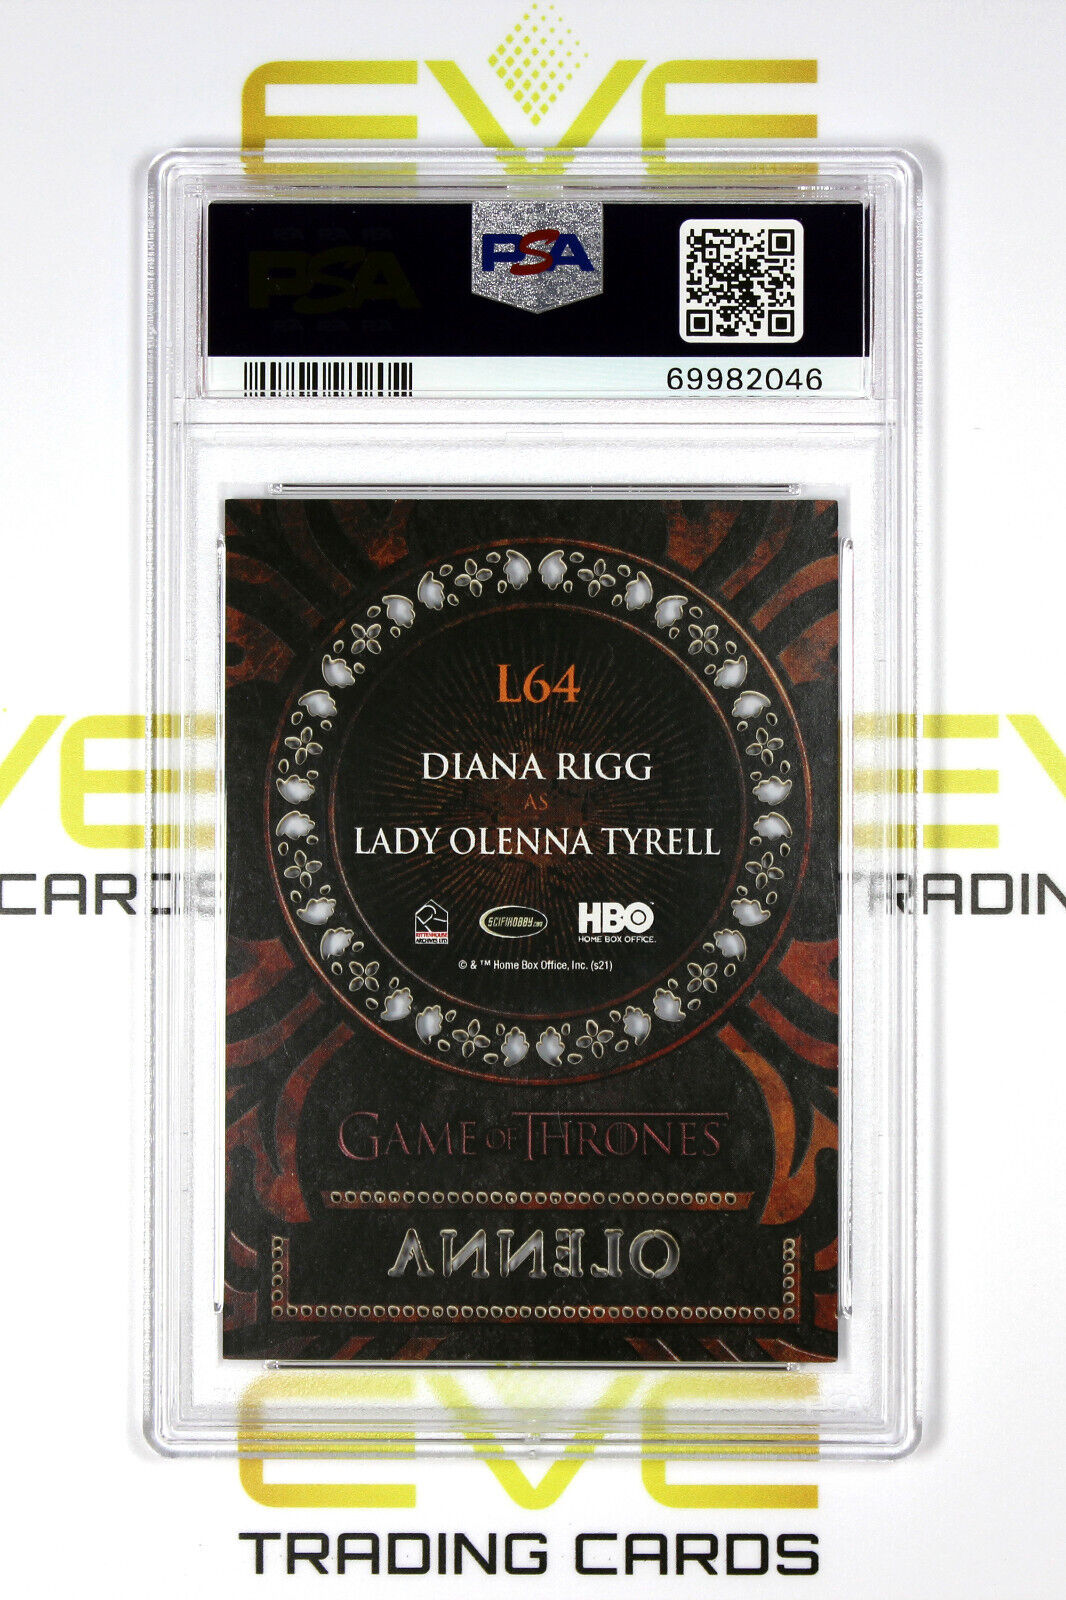 Graded Game of Thrones Card - #L64 2021 Lady Olenna Tyrell - Laser - PSA 9